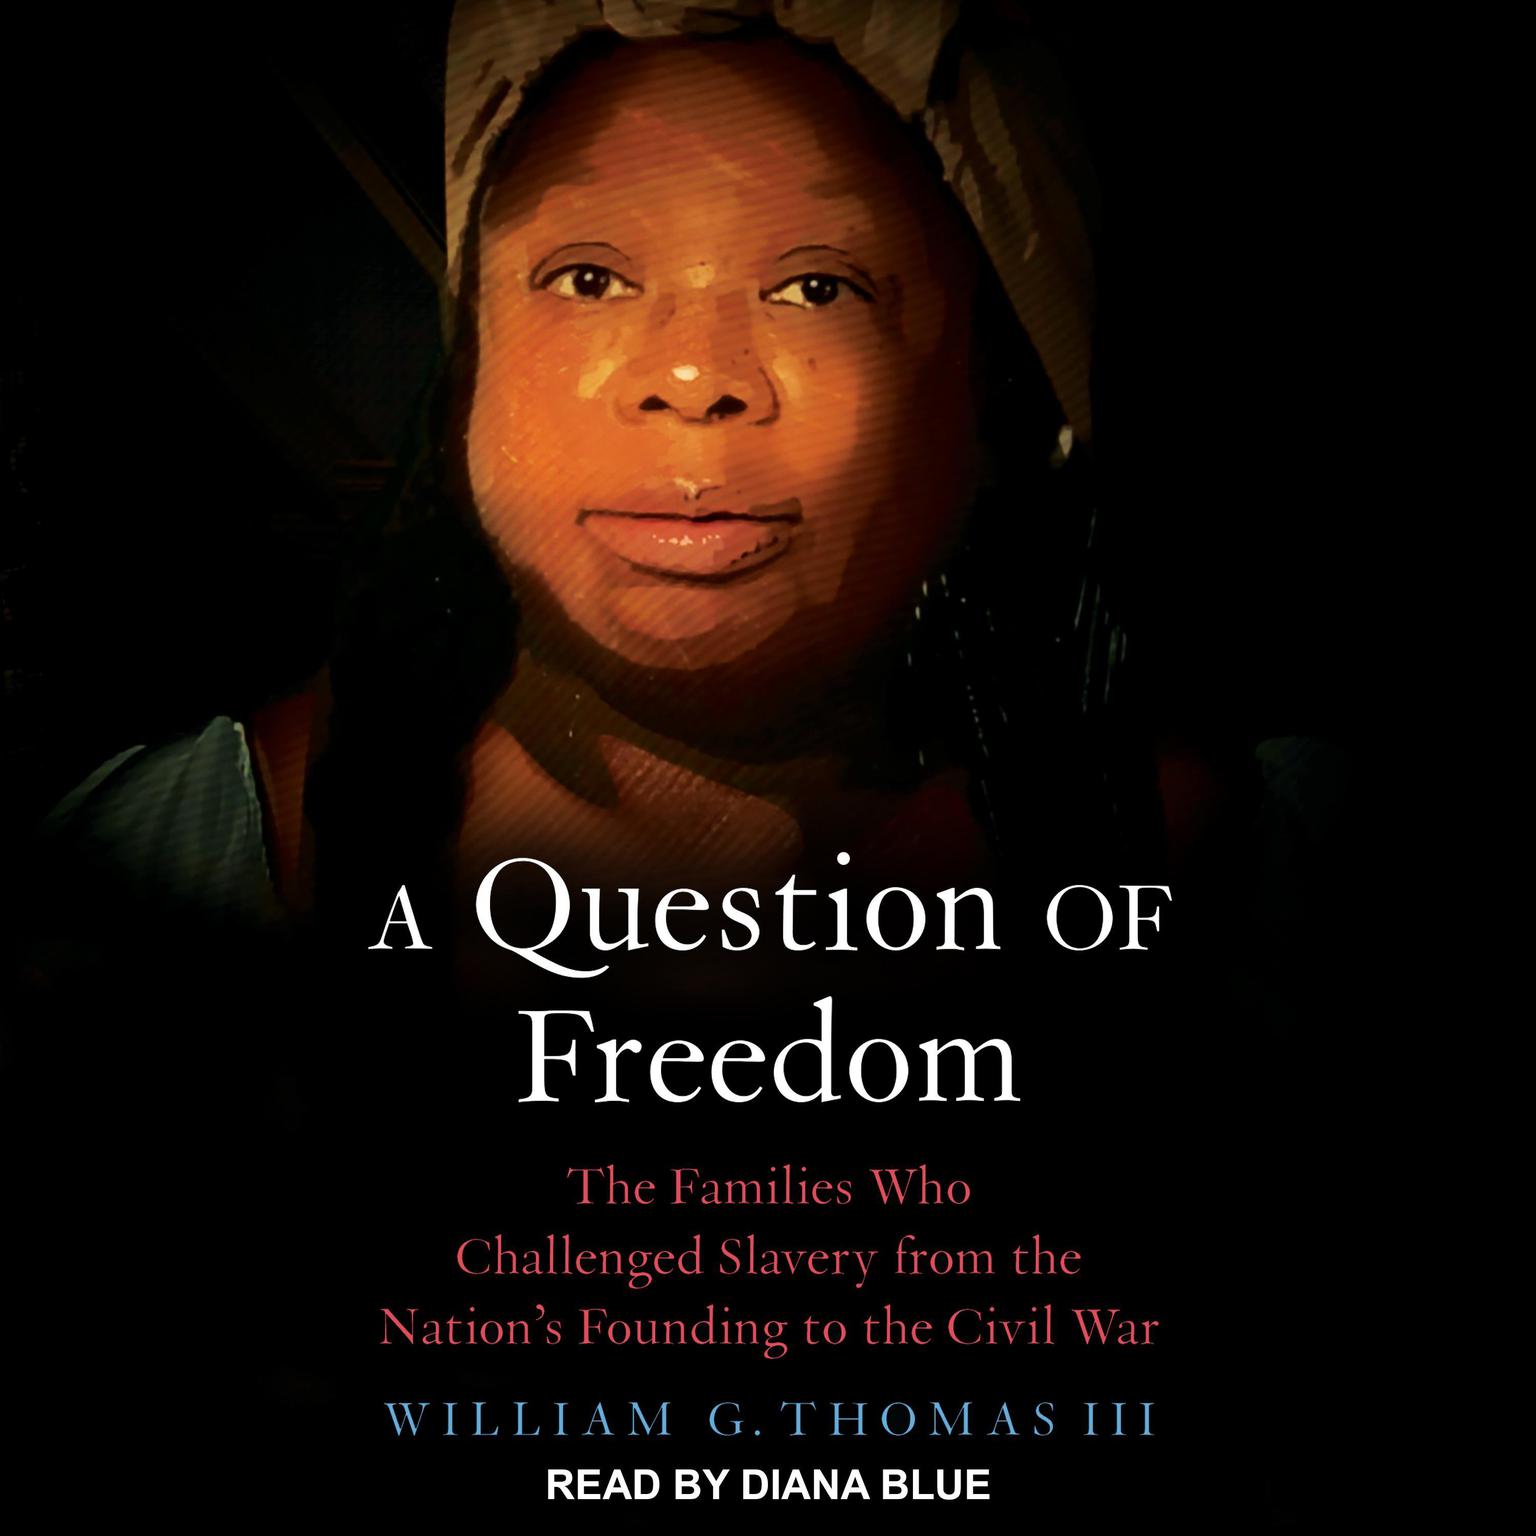 A Question of Freedom: The Families Who Challenged Slavery from the Nation’s Founding to the Civil War Audiobook, by William G. Thomas